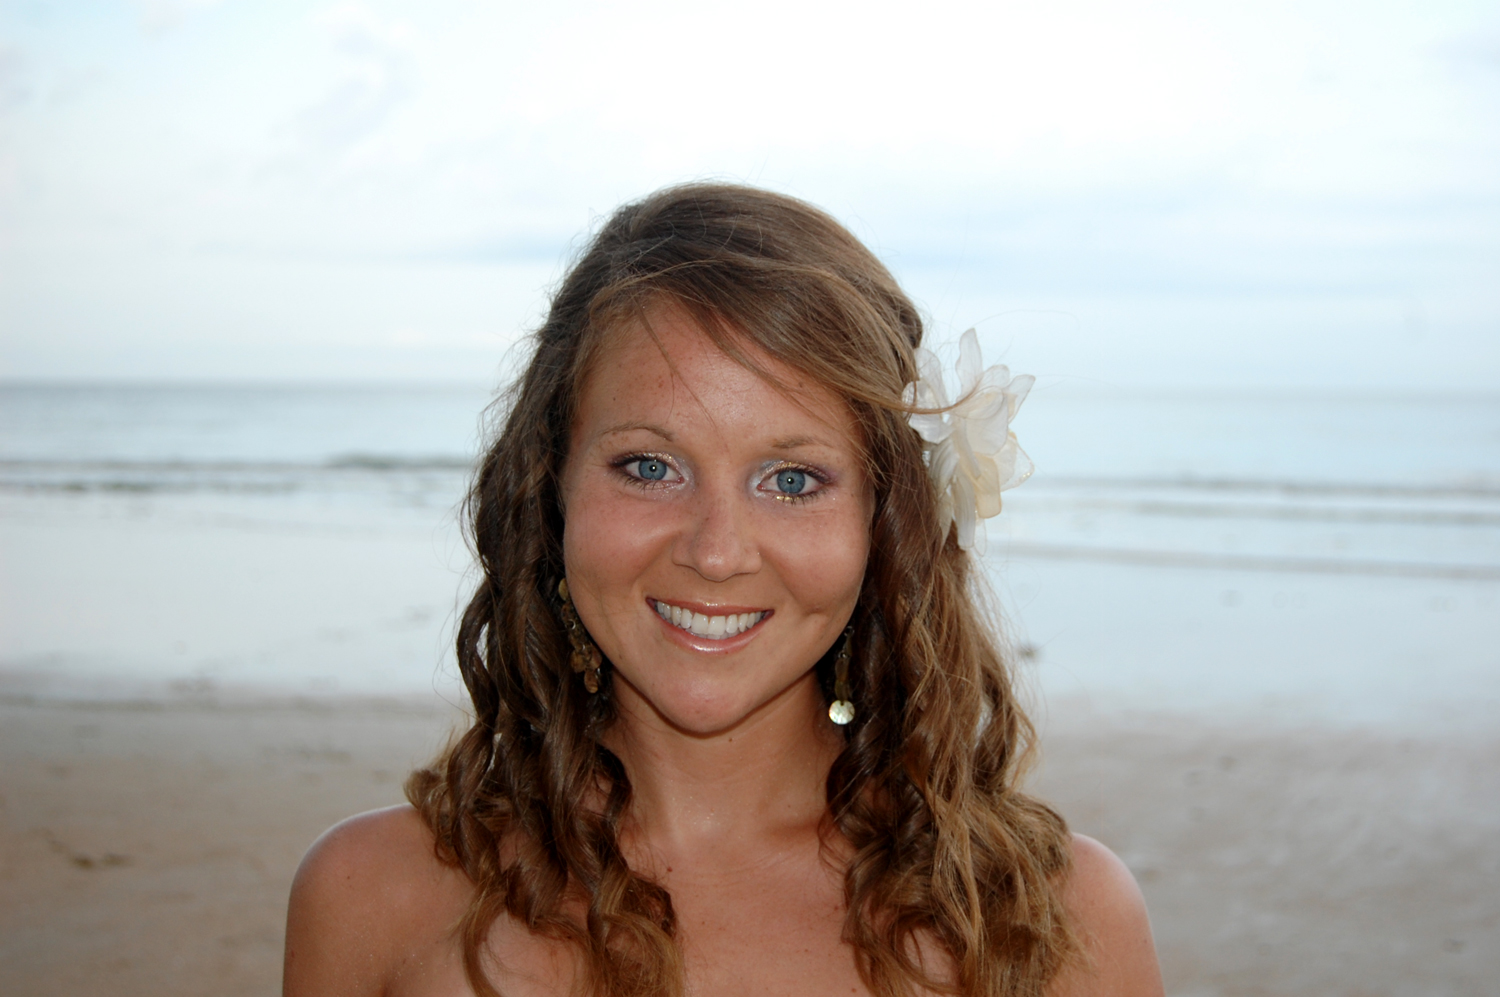 Index of /wp-content/gallery/2010-miss-flagler-county-scholarship-pageant-1...